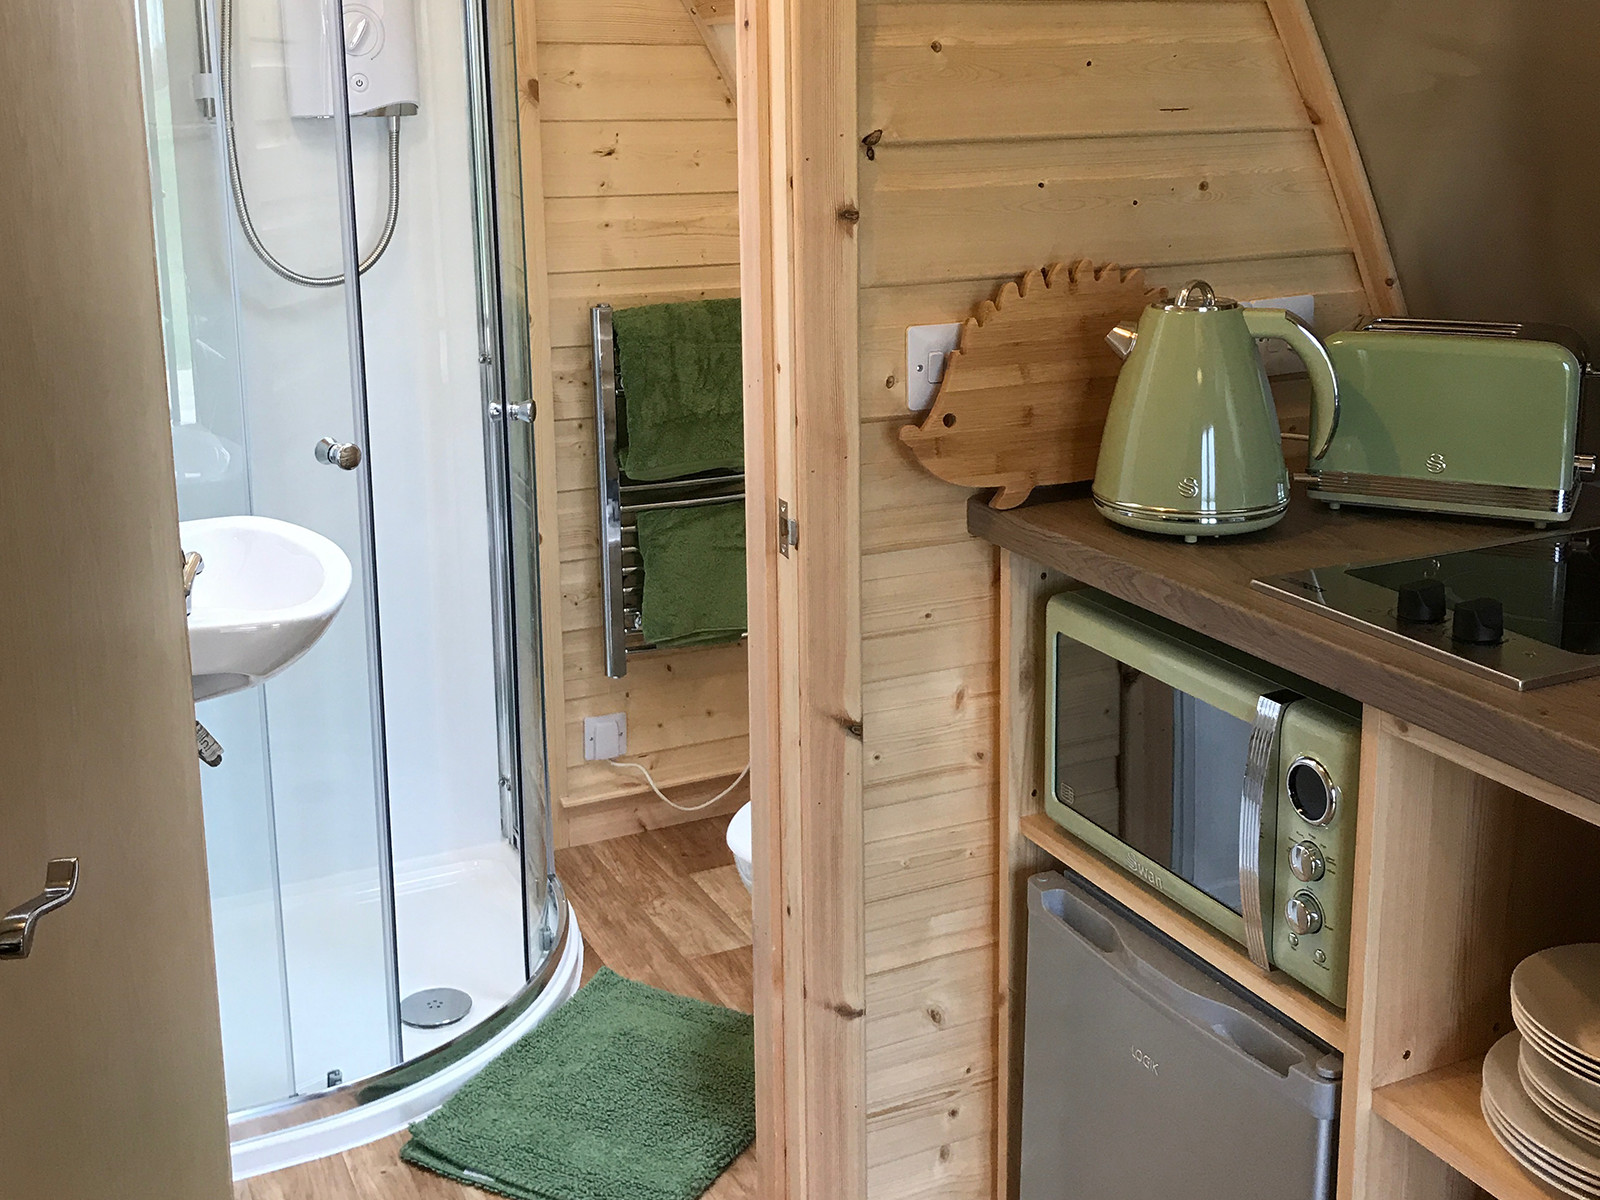 Luxury glamping pods with en-suite facilities